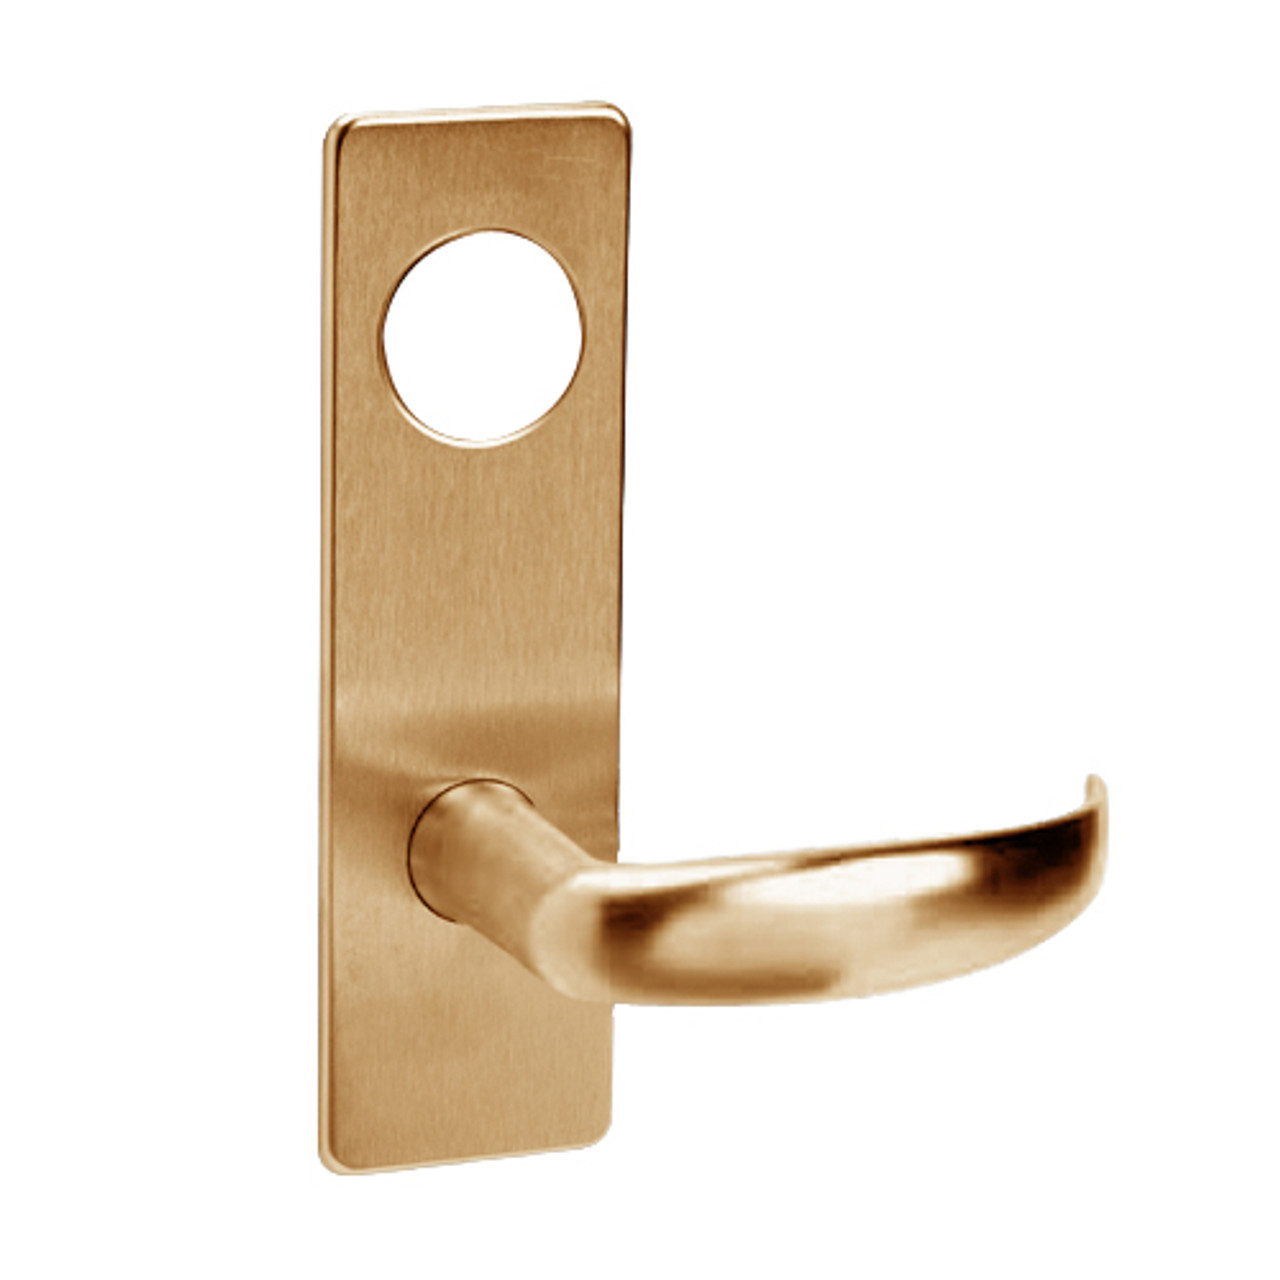 ML2042-PSP-612-M31 Corbin Russwin ML2000 Series Mortise Entrance Trim Pack with Princeton Lever in Satin Bronze